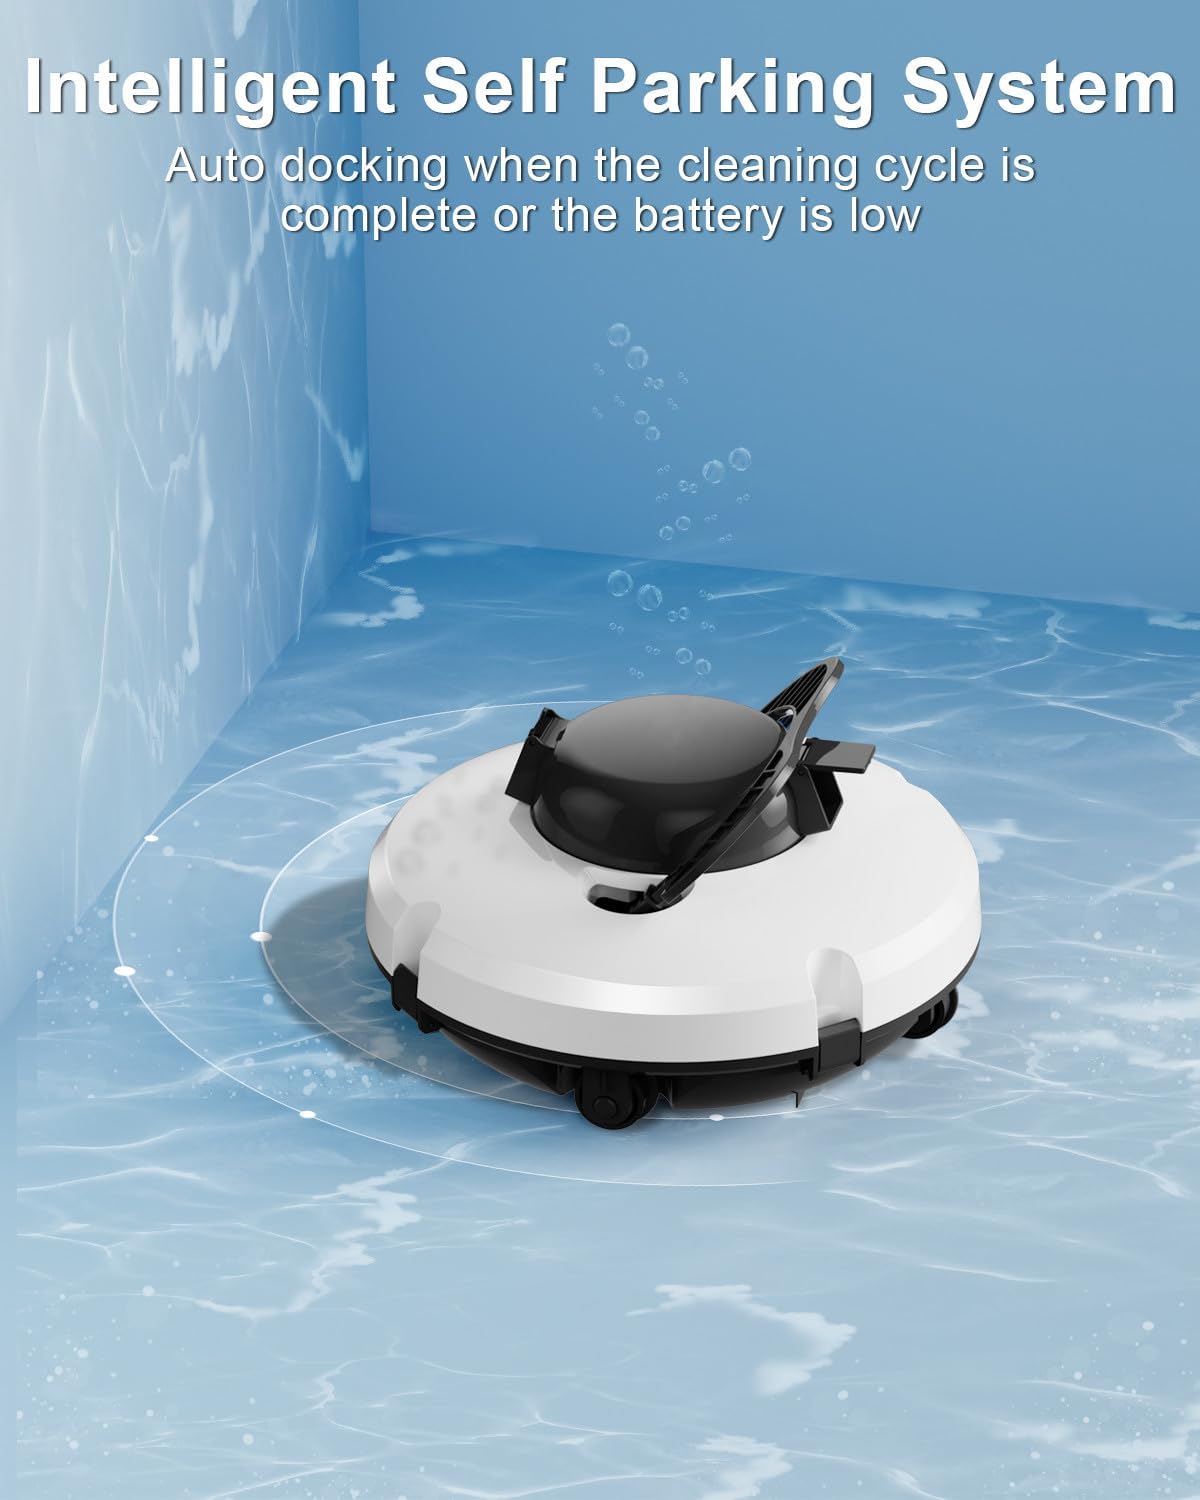 2024 New Cordless Robotic Pool Cleaner Robot, Pool Vacuum Robot with Dual-Drive Motors, Lasts 120 Mins, Auto-Dock, Lightweight Pool Robot Vacuum for Inground & above Ground Flat Pools up to 1000 Sq.Ft